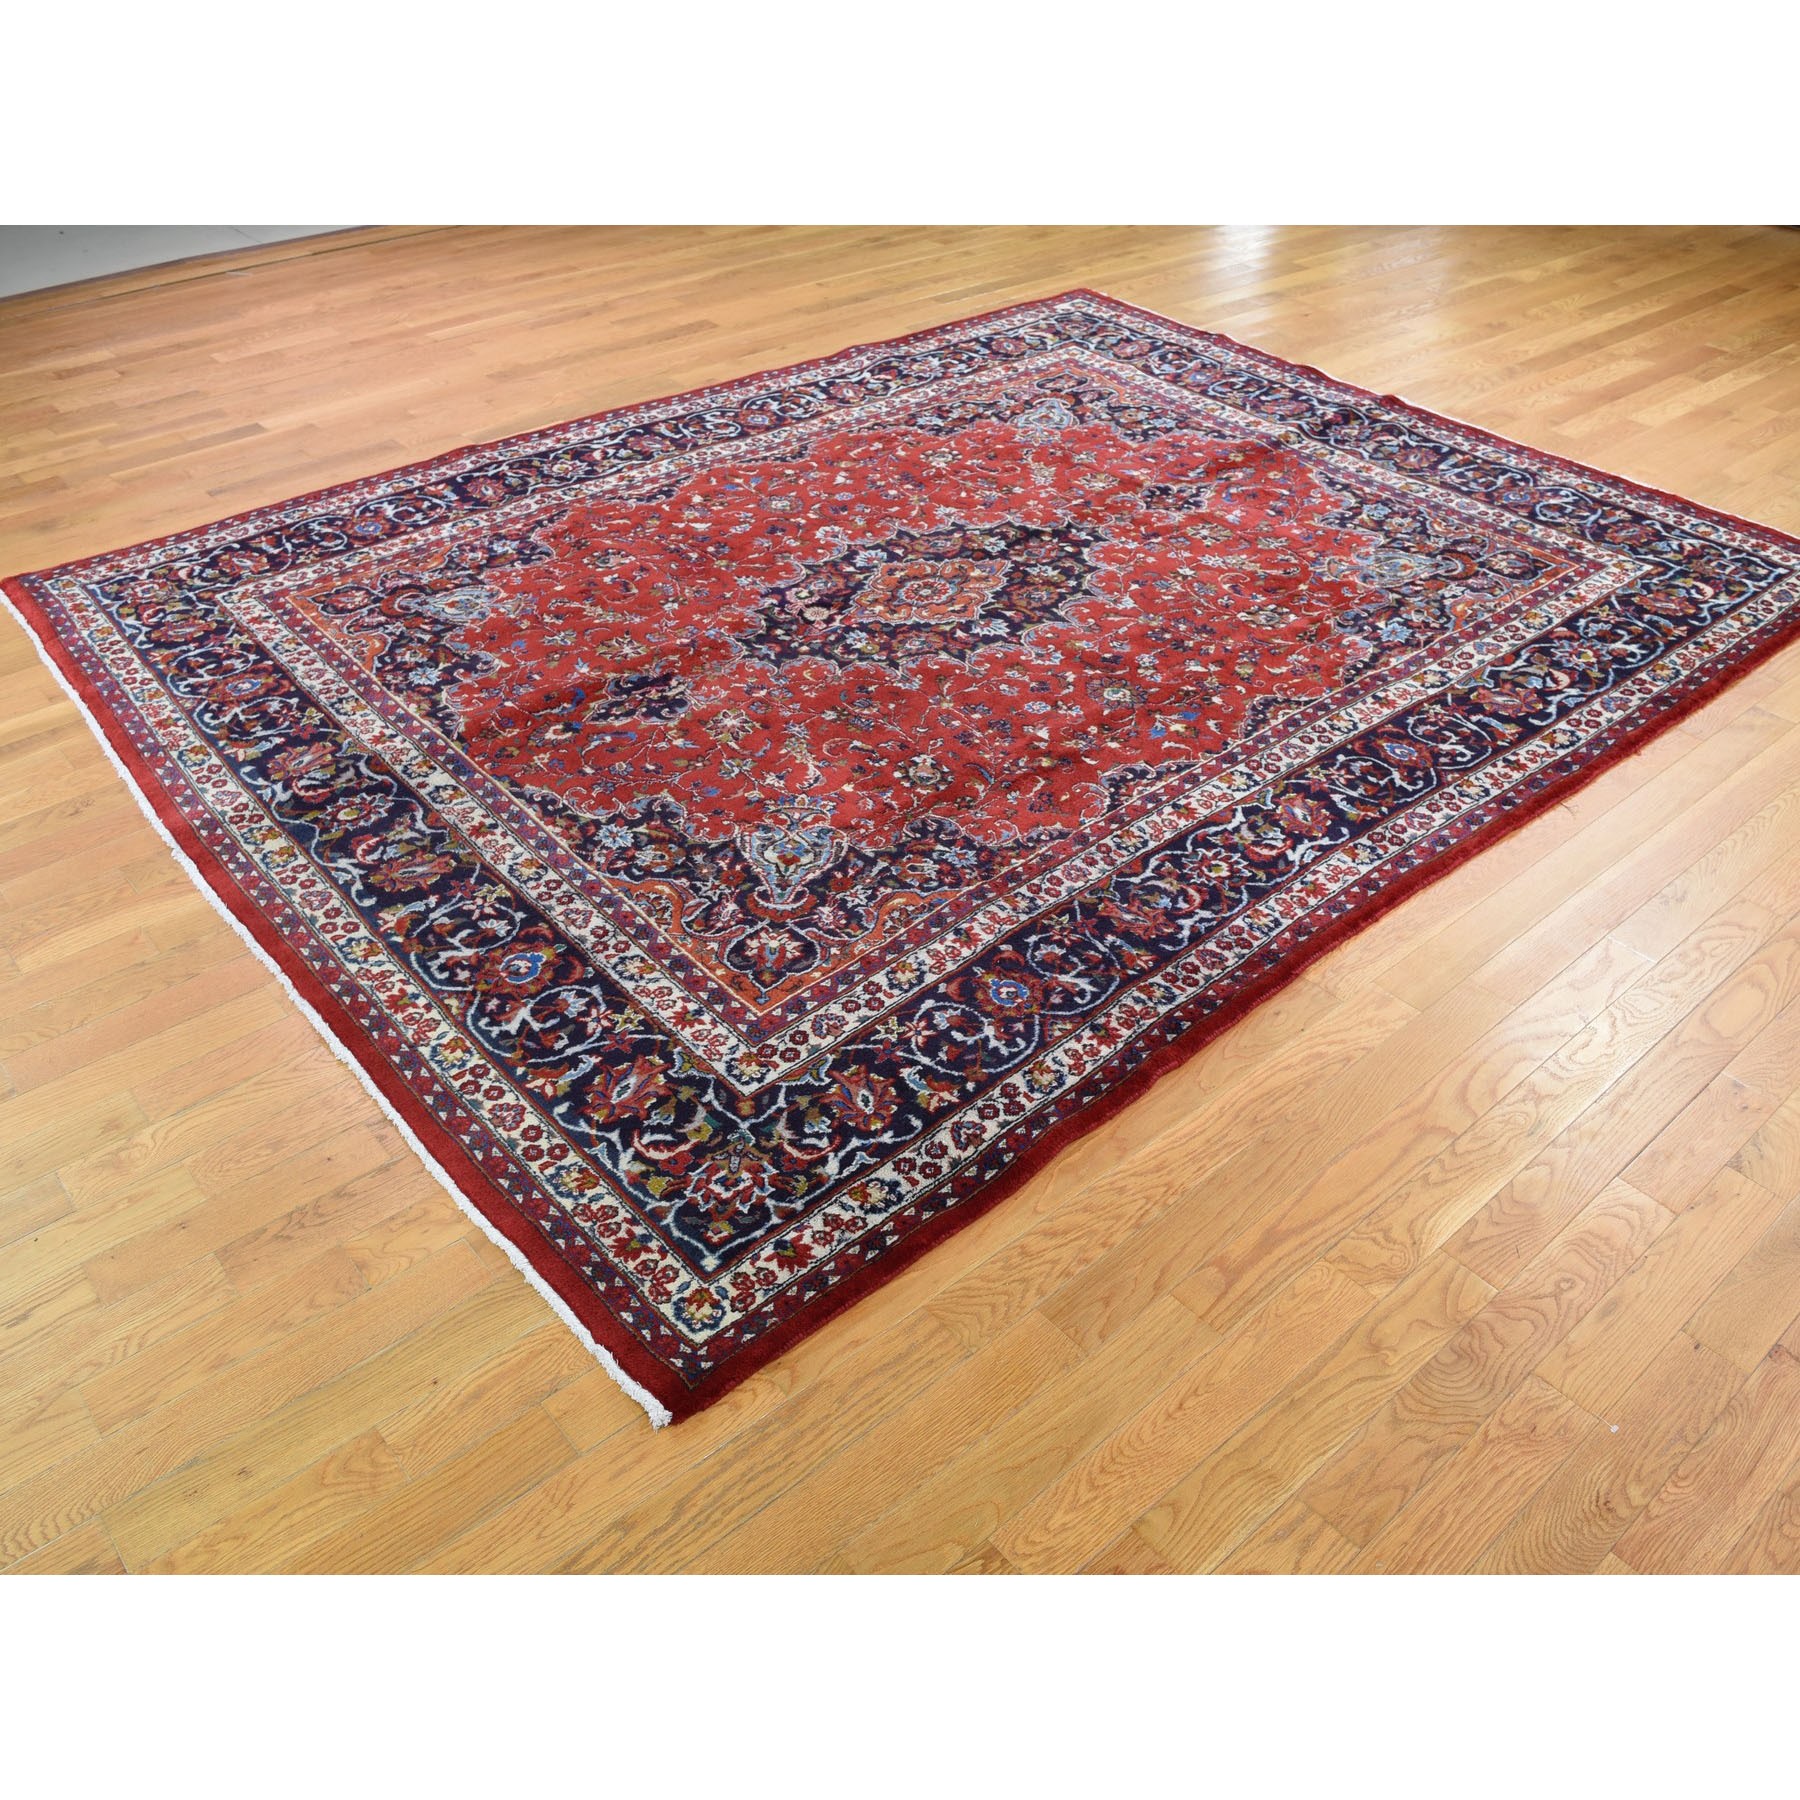 8-1 x10-5  Red Vintage Mashad Pure Wool Full Pile Hand Knotted Oriental Rug 